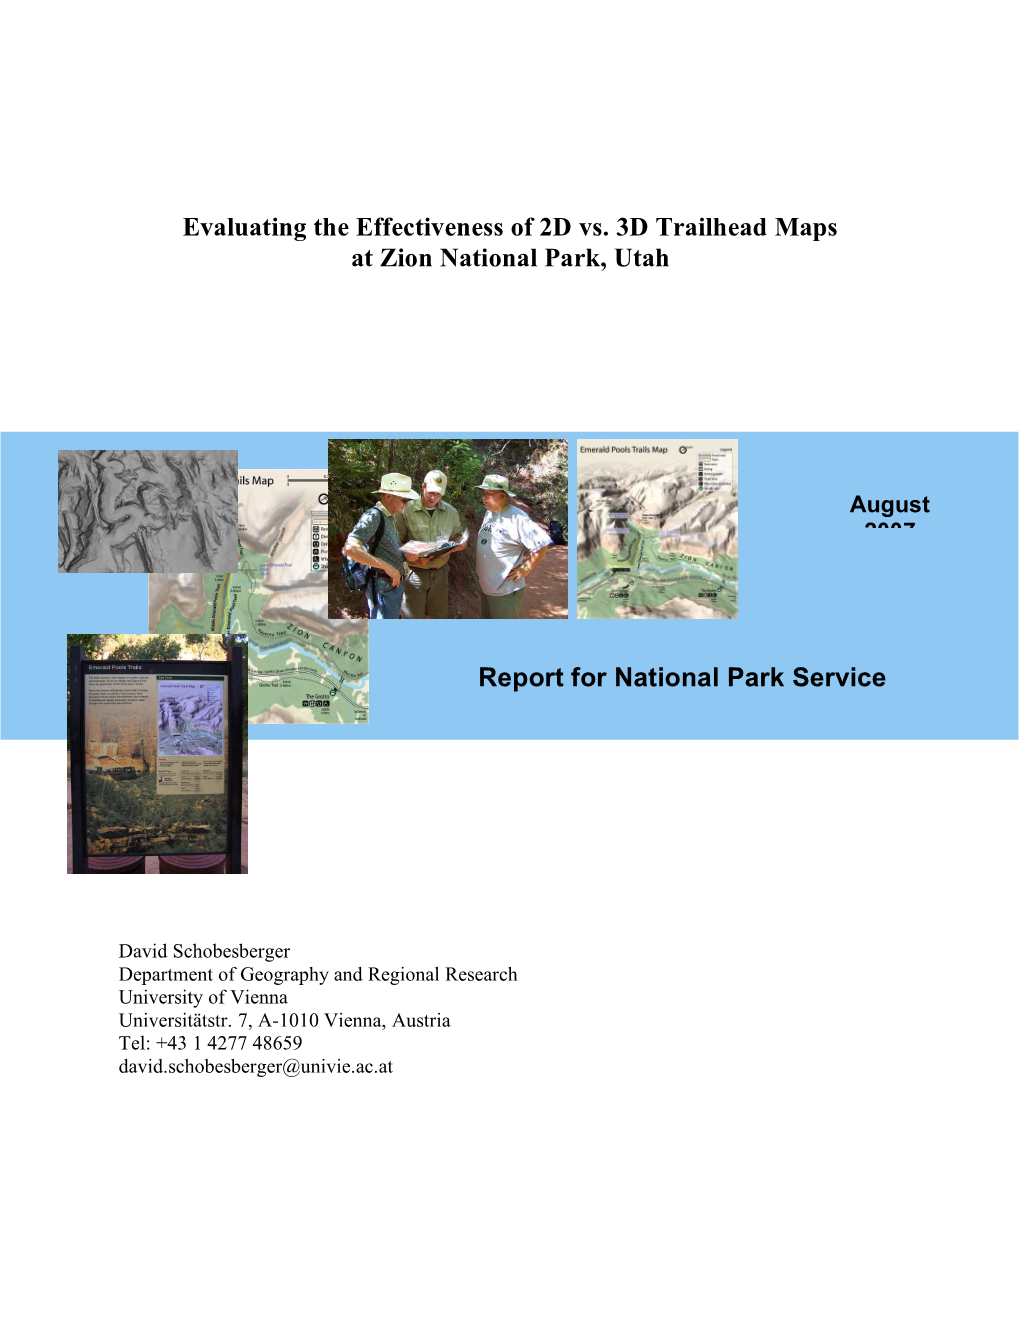 Evaluating the Effectiveness of 2D Vs. 3D Trailhead Maps at Zion National Park, Utah